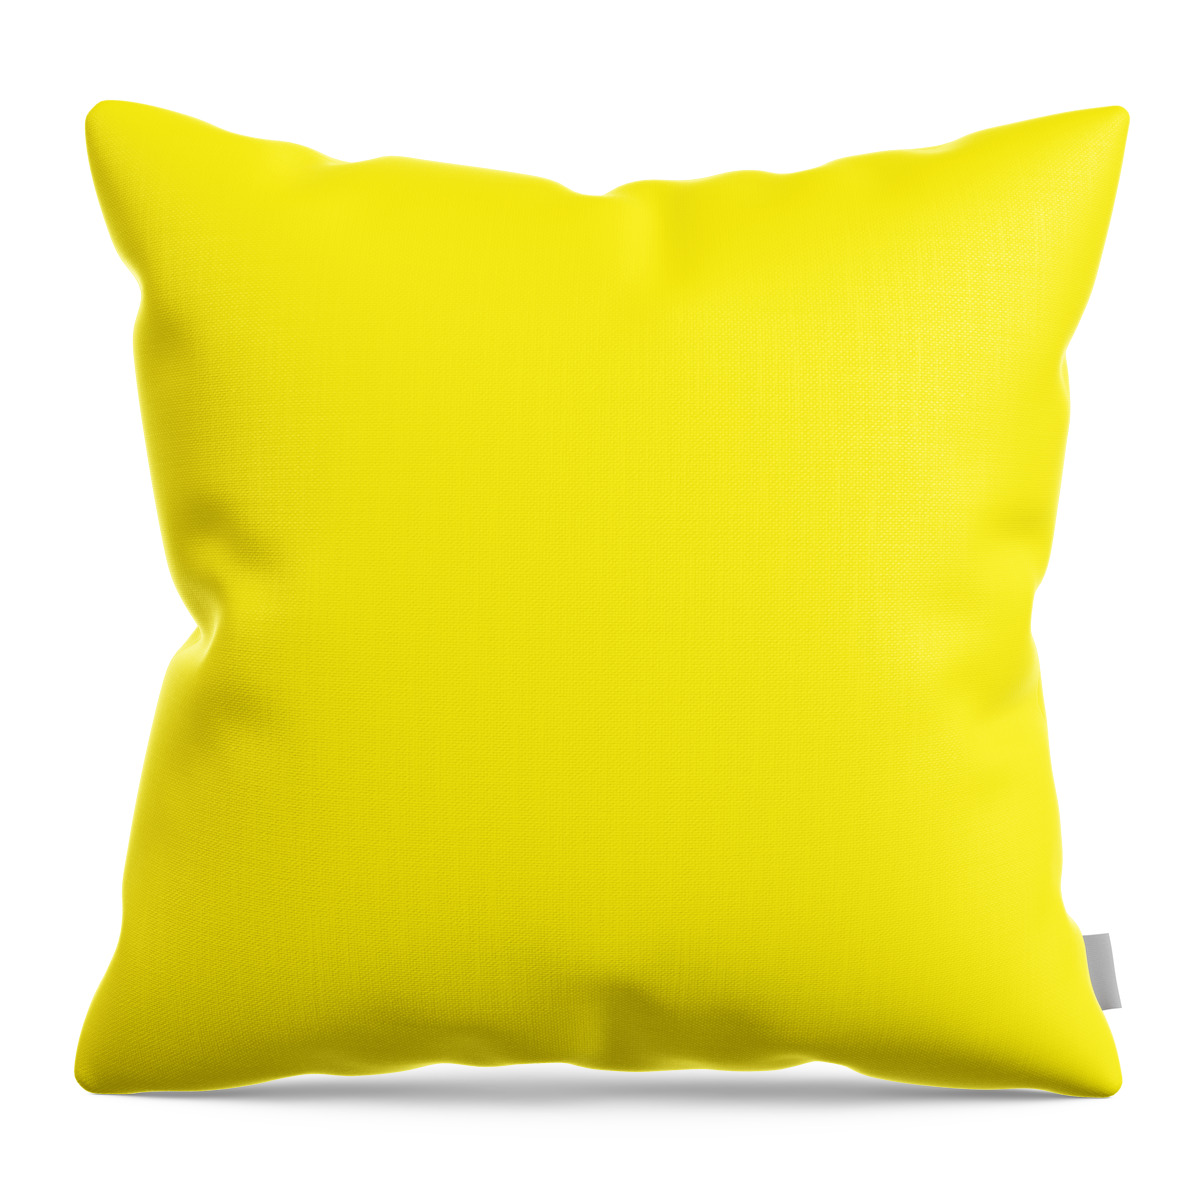 Solid Throw Pillow featuring the digital art Solid Plain Yellow by Delynn Addams